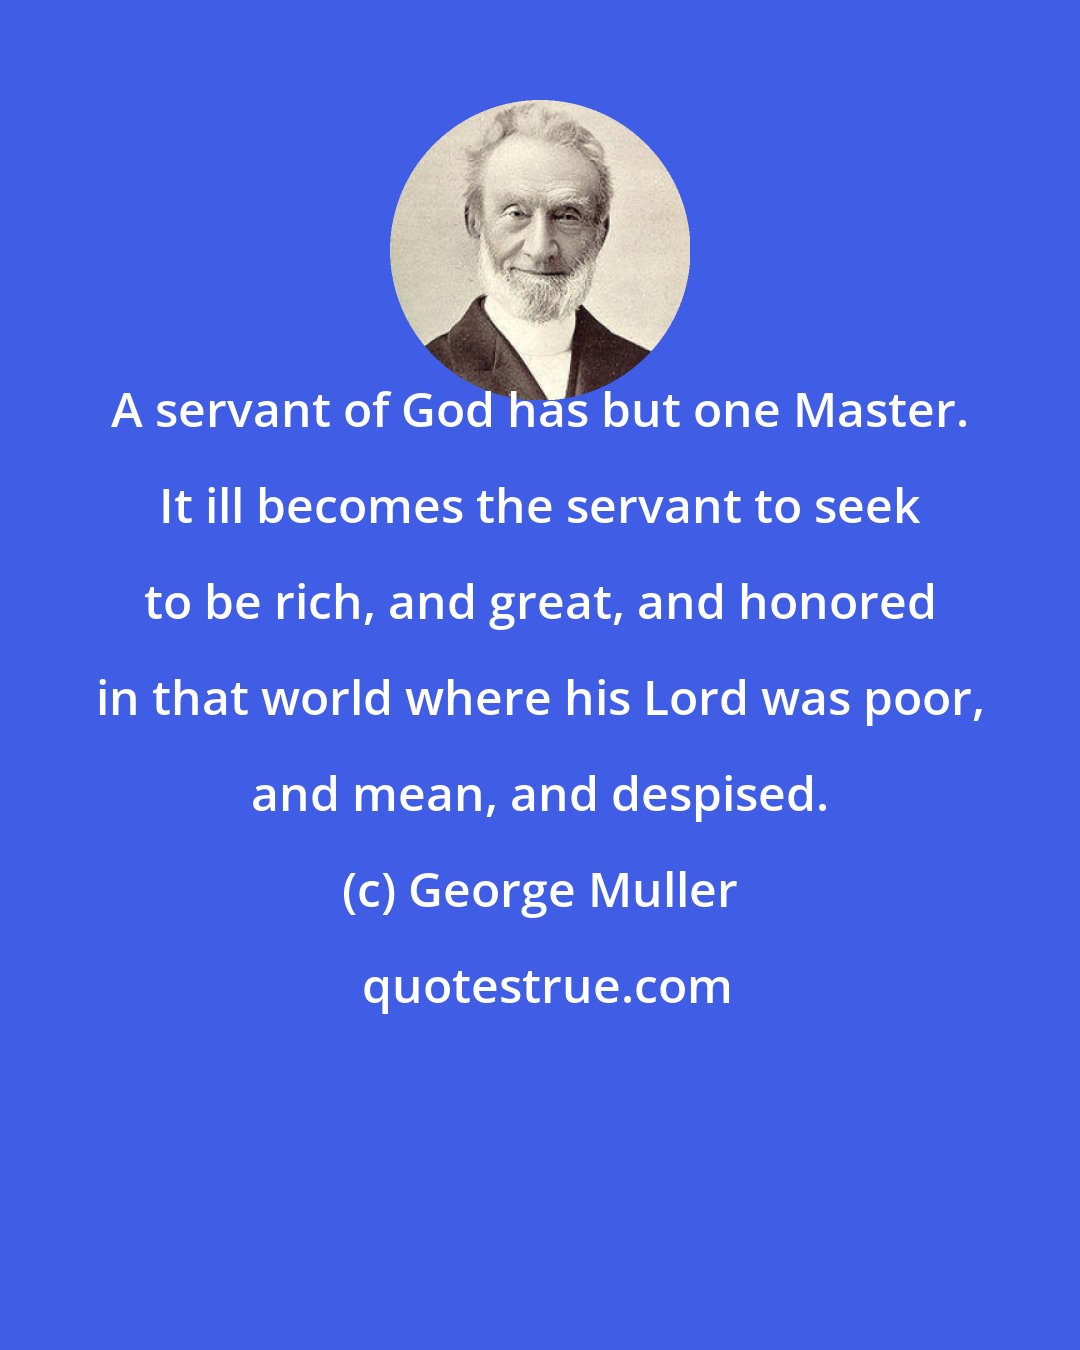 George Muller: A servant of God has but one Master. It ill becomes the servant to seek to be rich, and great, and honored in that world where his Lord was poor, and mean, and despised.